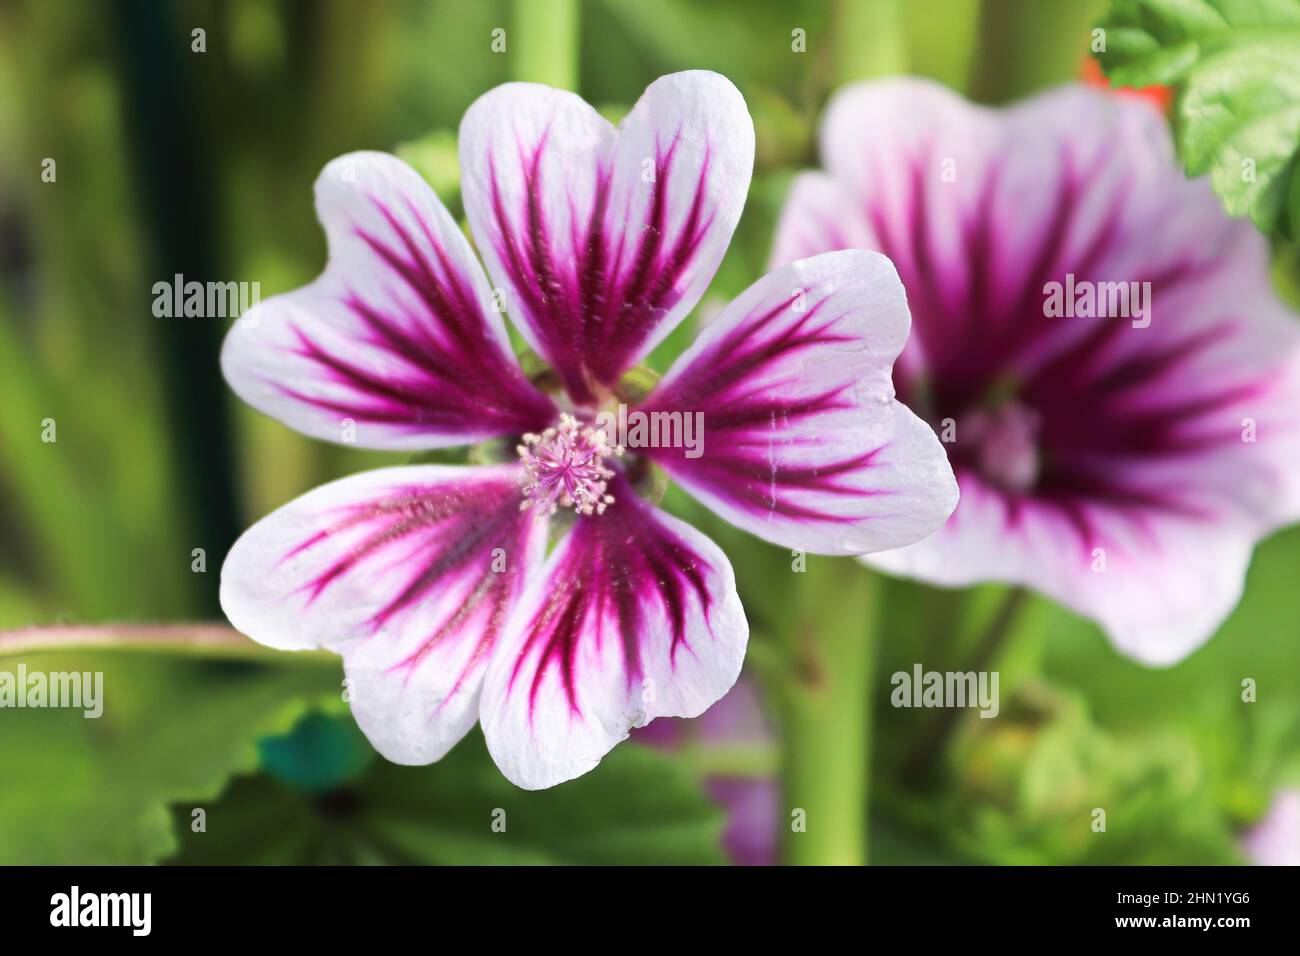 Closeup view of the purple petals on a mallow plant. Stock Photo